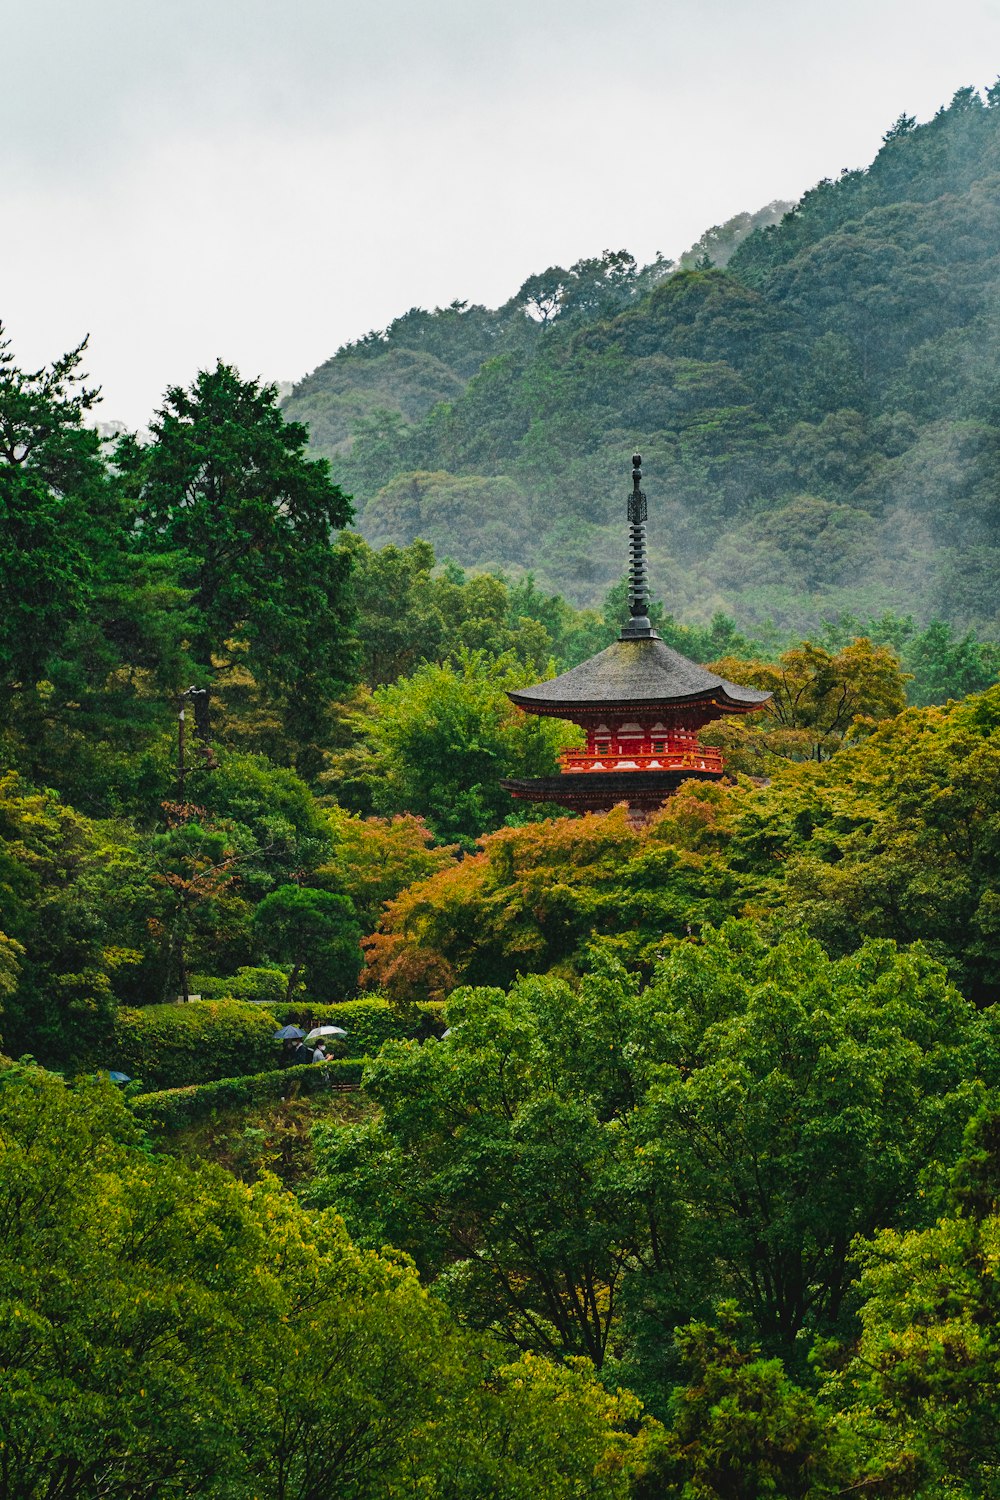 black and red temple surrounded by green trees